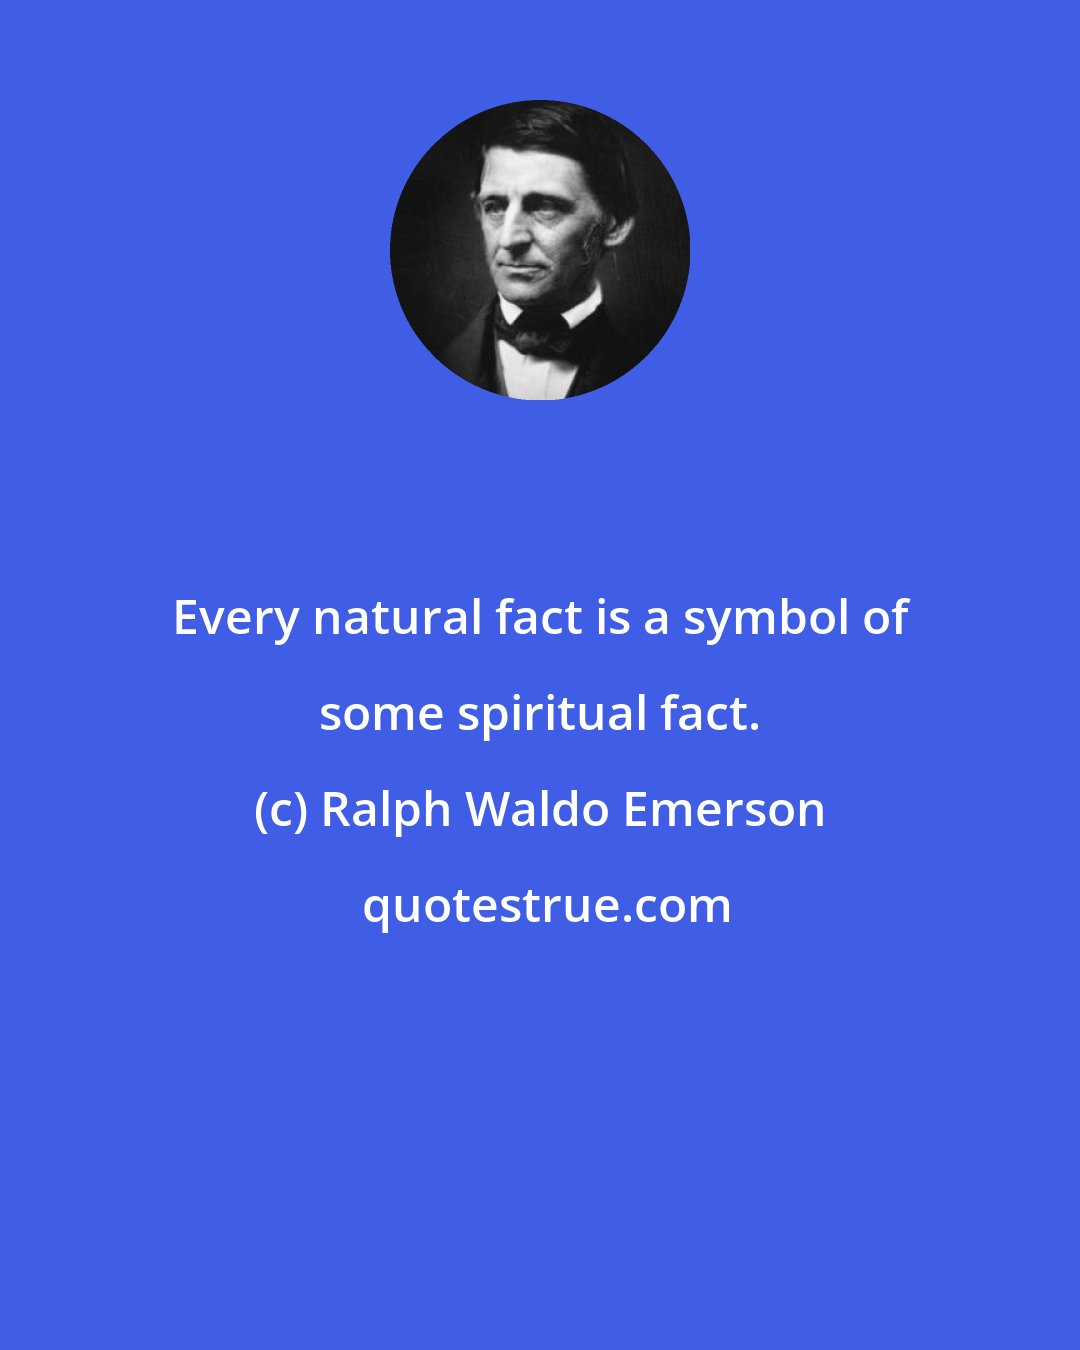 Ralph Waldo Emerson: Every natural fact is a symbol of some spiritual fact.